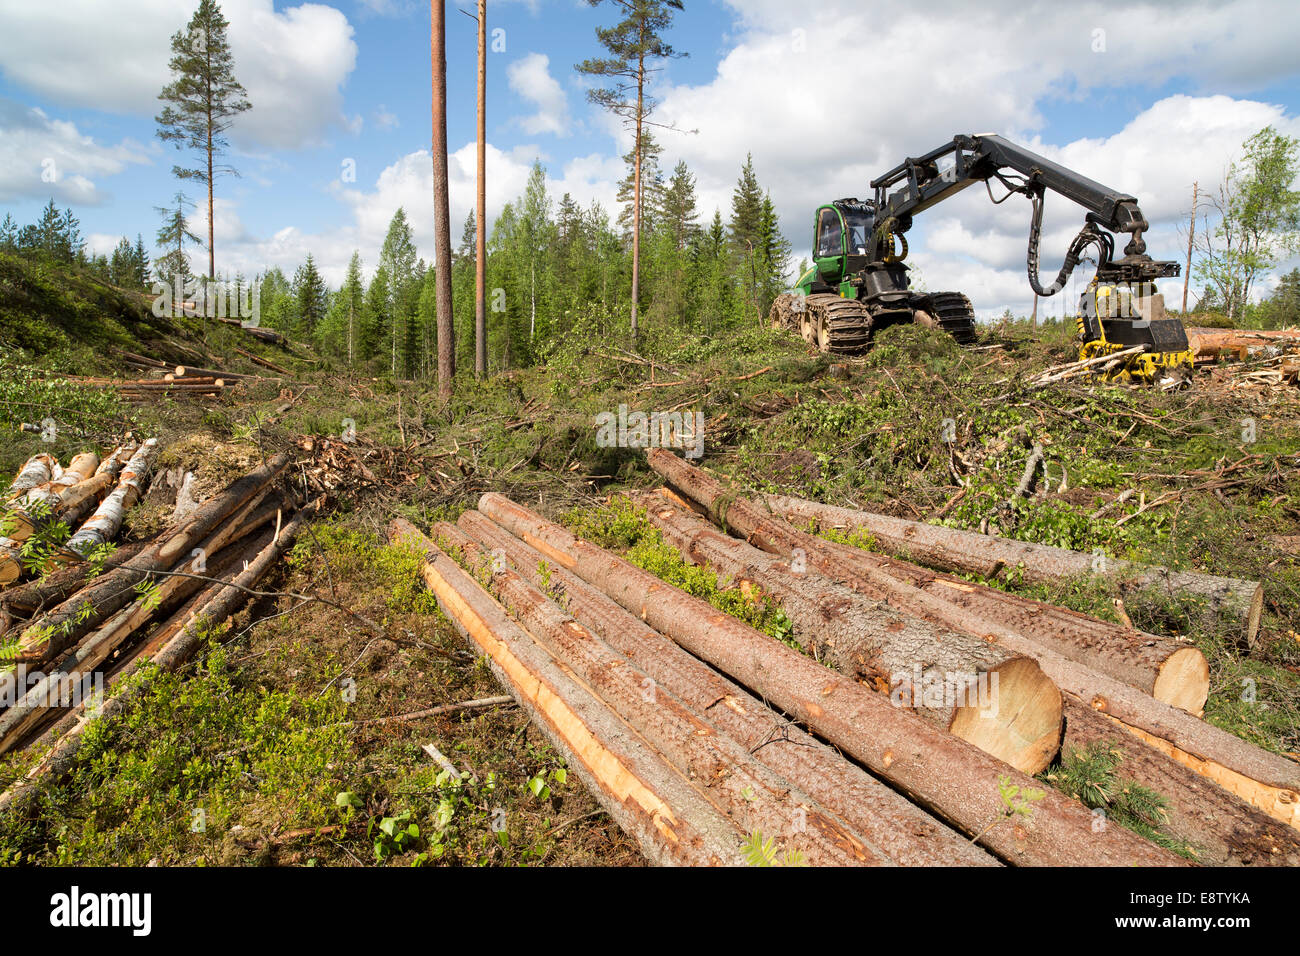 John Deere 1170E forest harvester and felled and bucked spruce logs at clear cutting area in the taiga forest , Finland Stock Photo